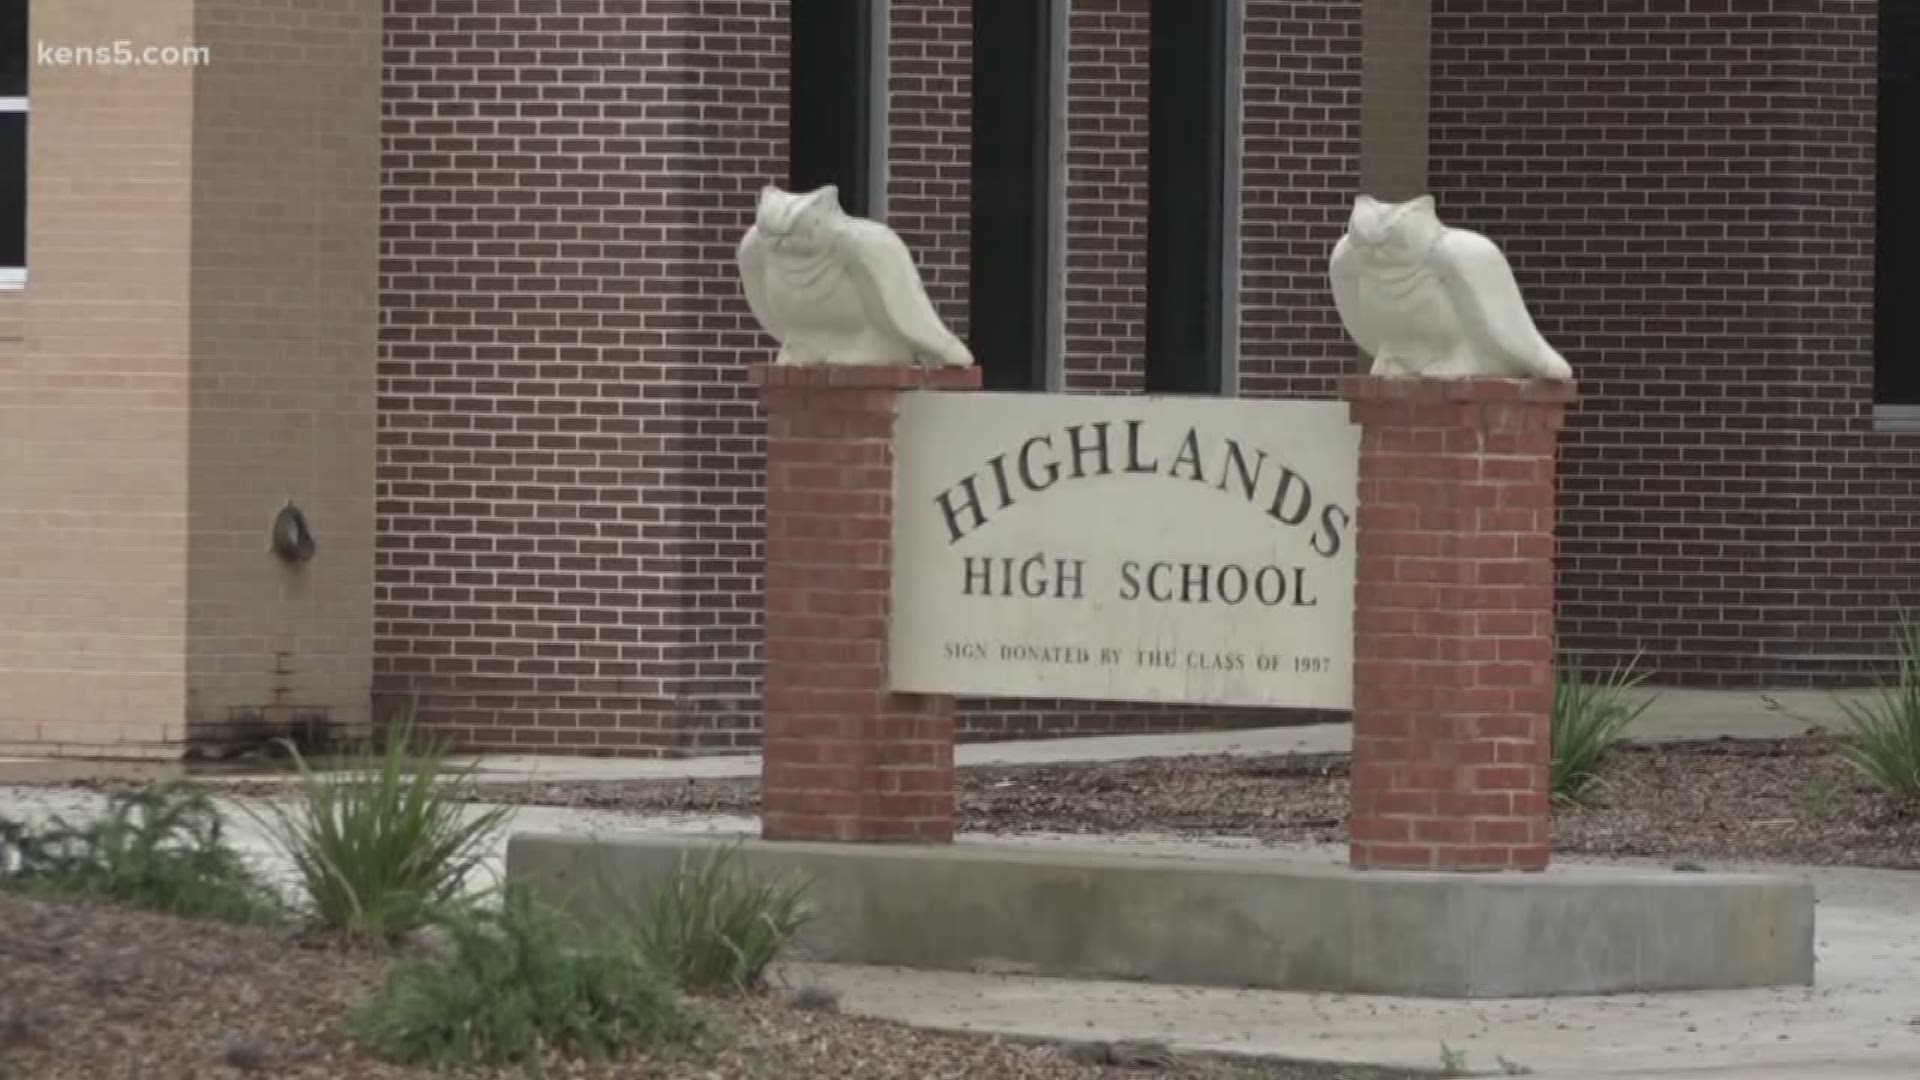 The new charter program at Highlands High School is geared for 250 students who are at least one year behind in school.